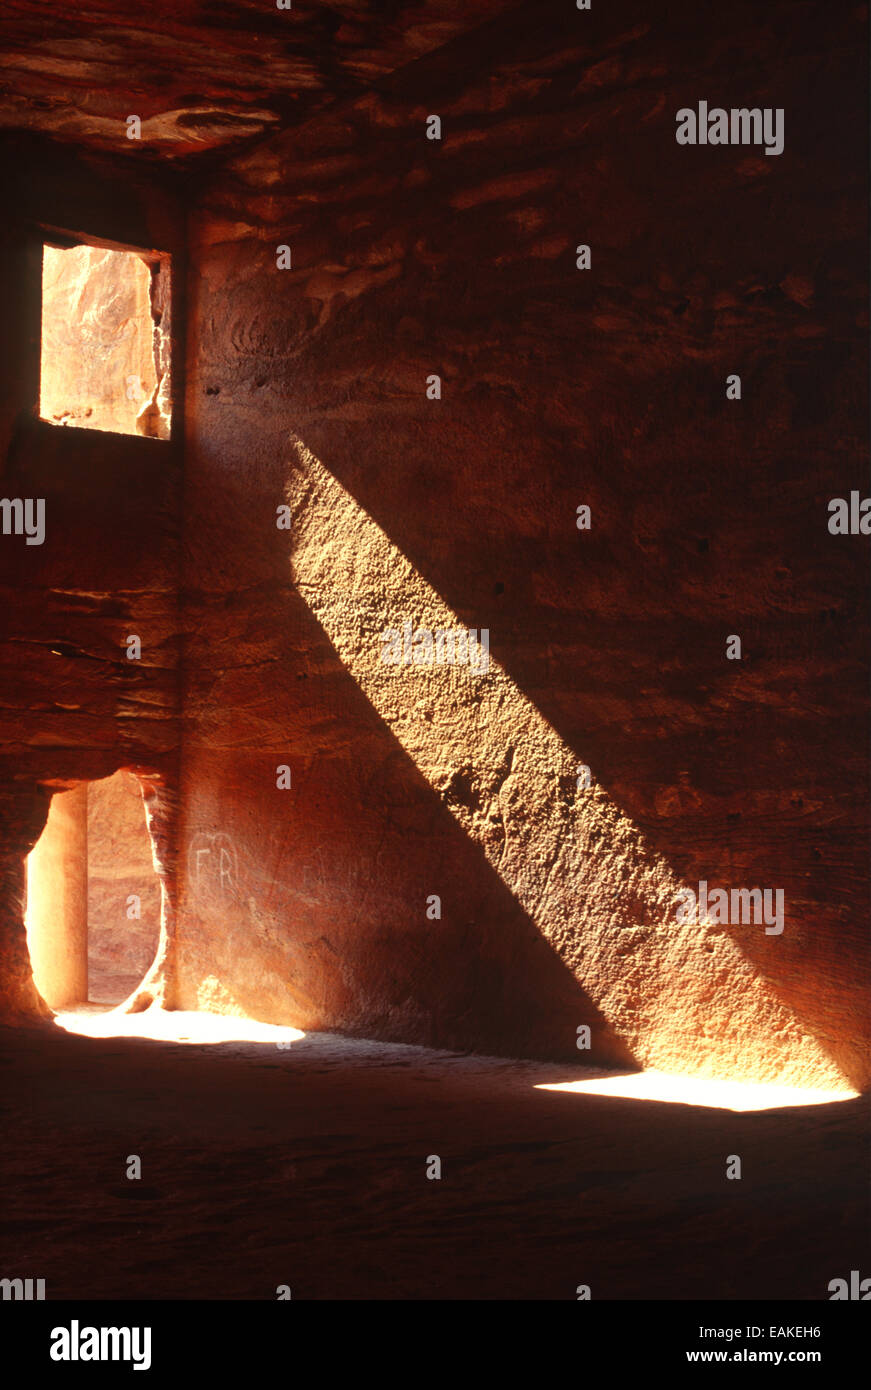 A shaft of light shines through an opening of the Urn Tomb in Petra, Jordan Stock Photo